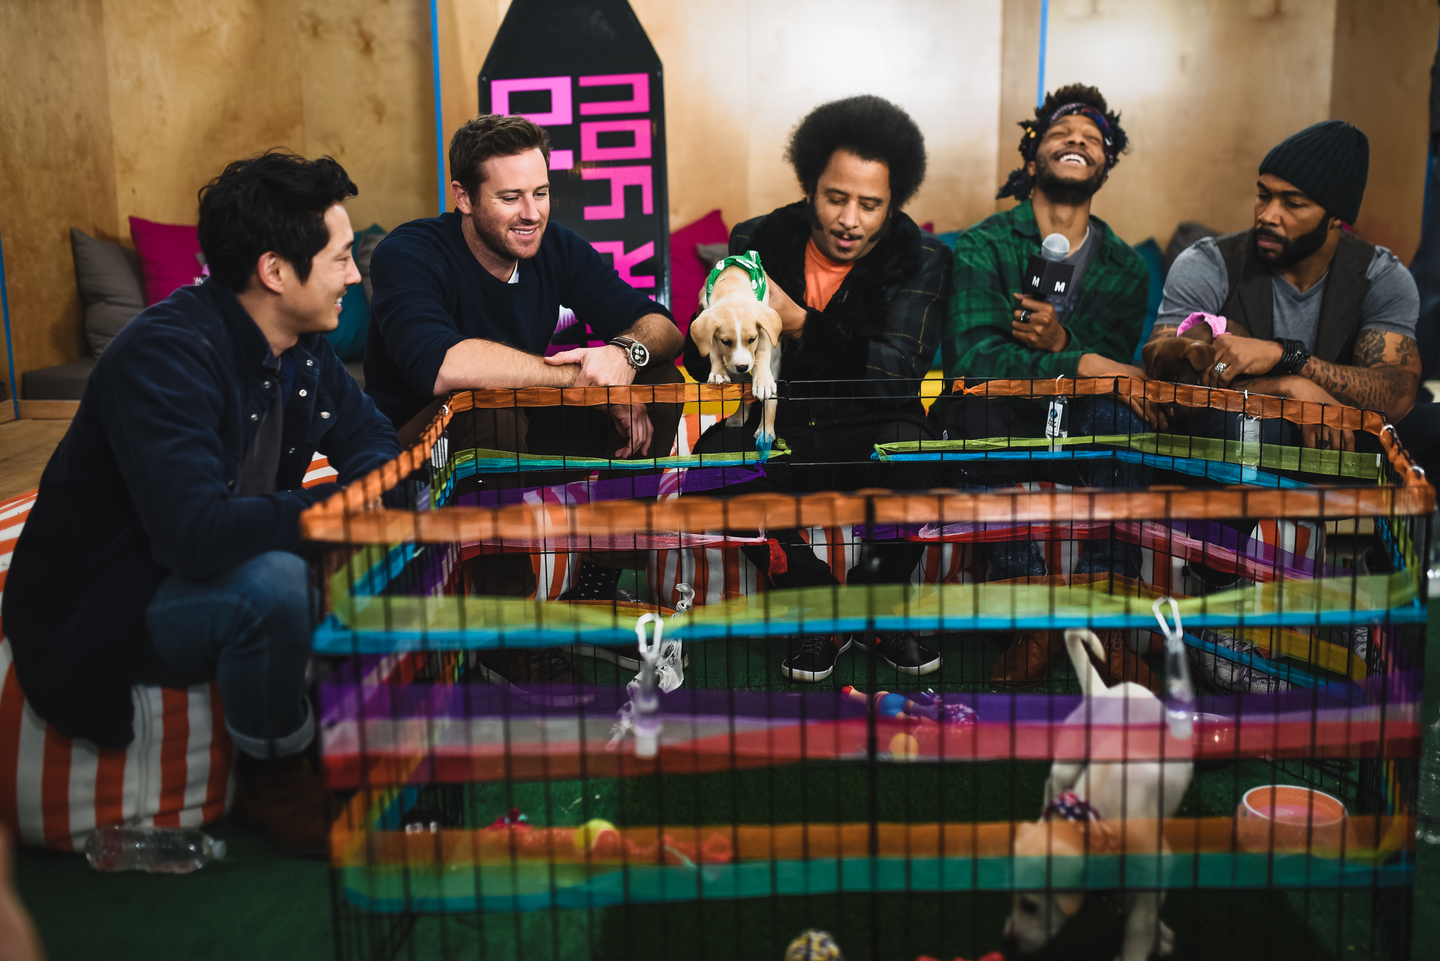 (L-R) Steven Yeun, Armie Hammer, Boots Riley, Jermaine Fowler and Omari Hardwick of the film Sorry To Bother You stopped by Mashable House: Time Warp to visit puppies brought by The Austin Humane Society. Photo by Judy Won